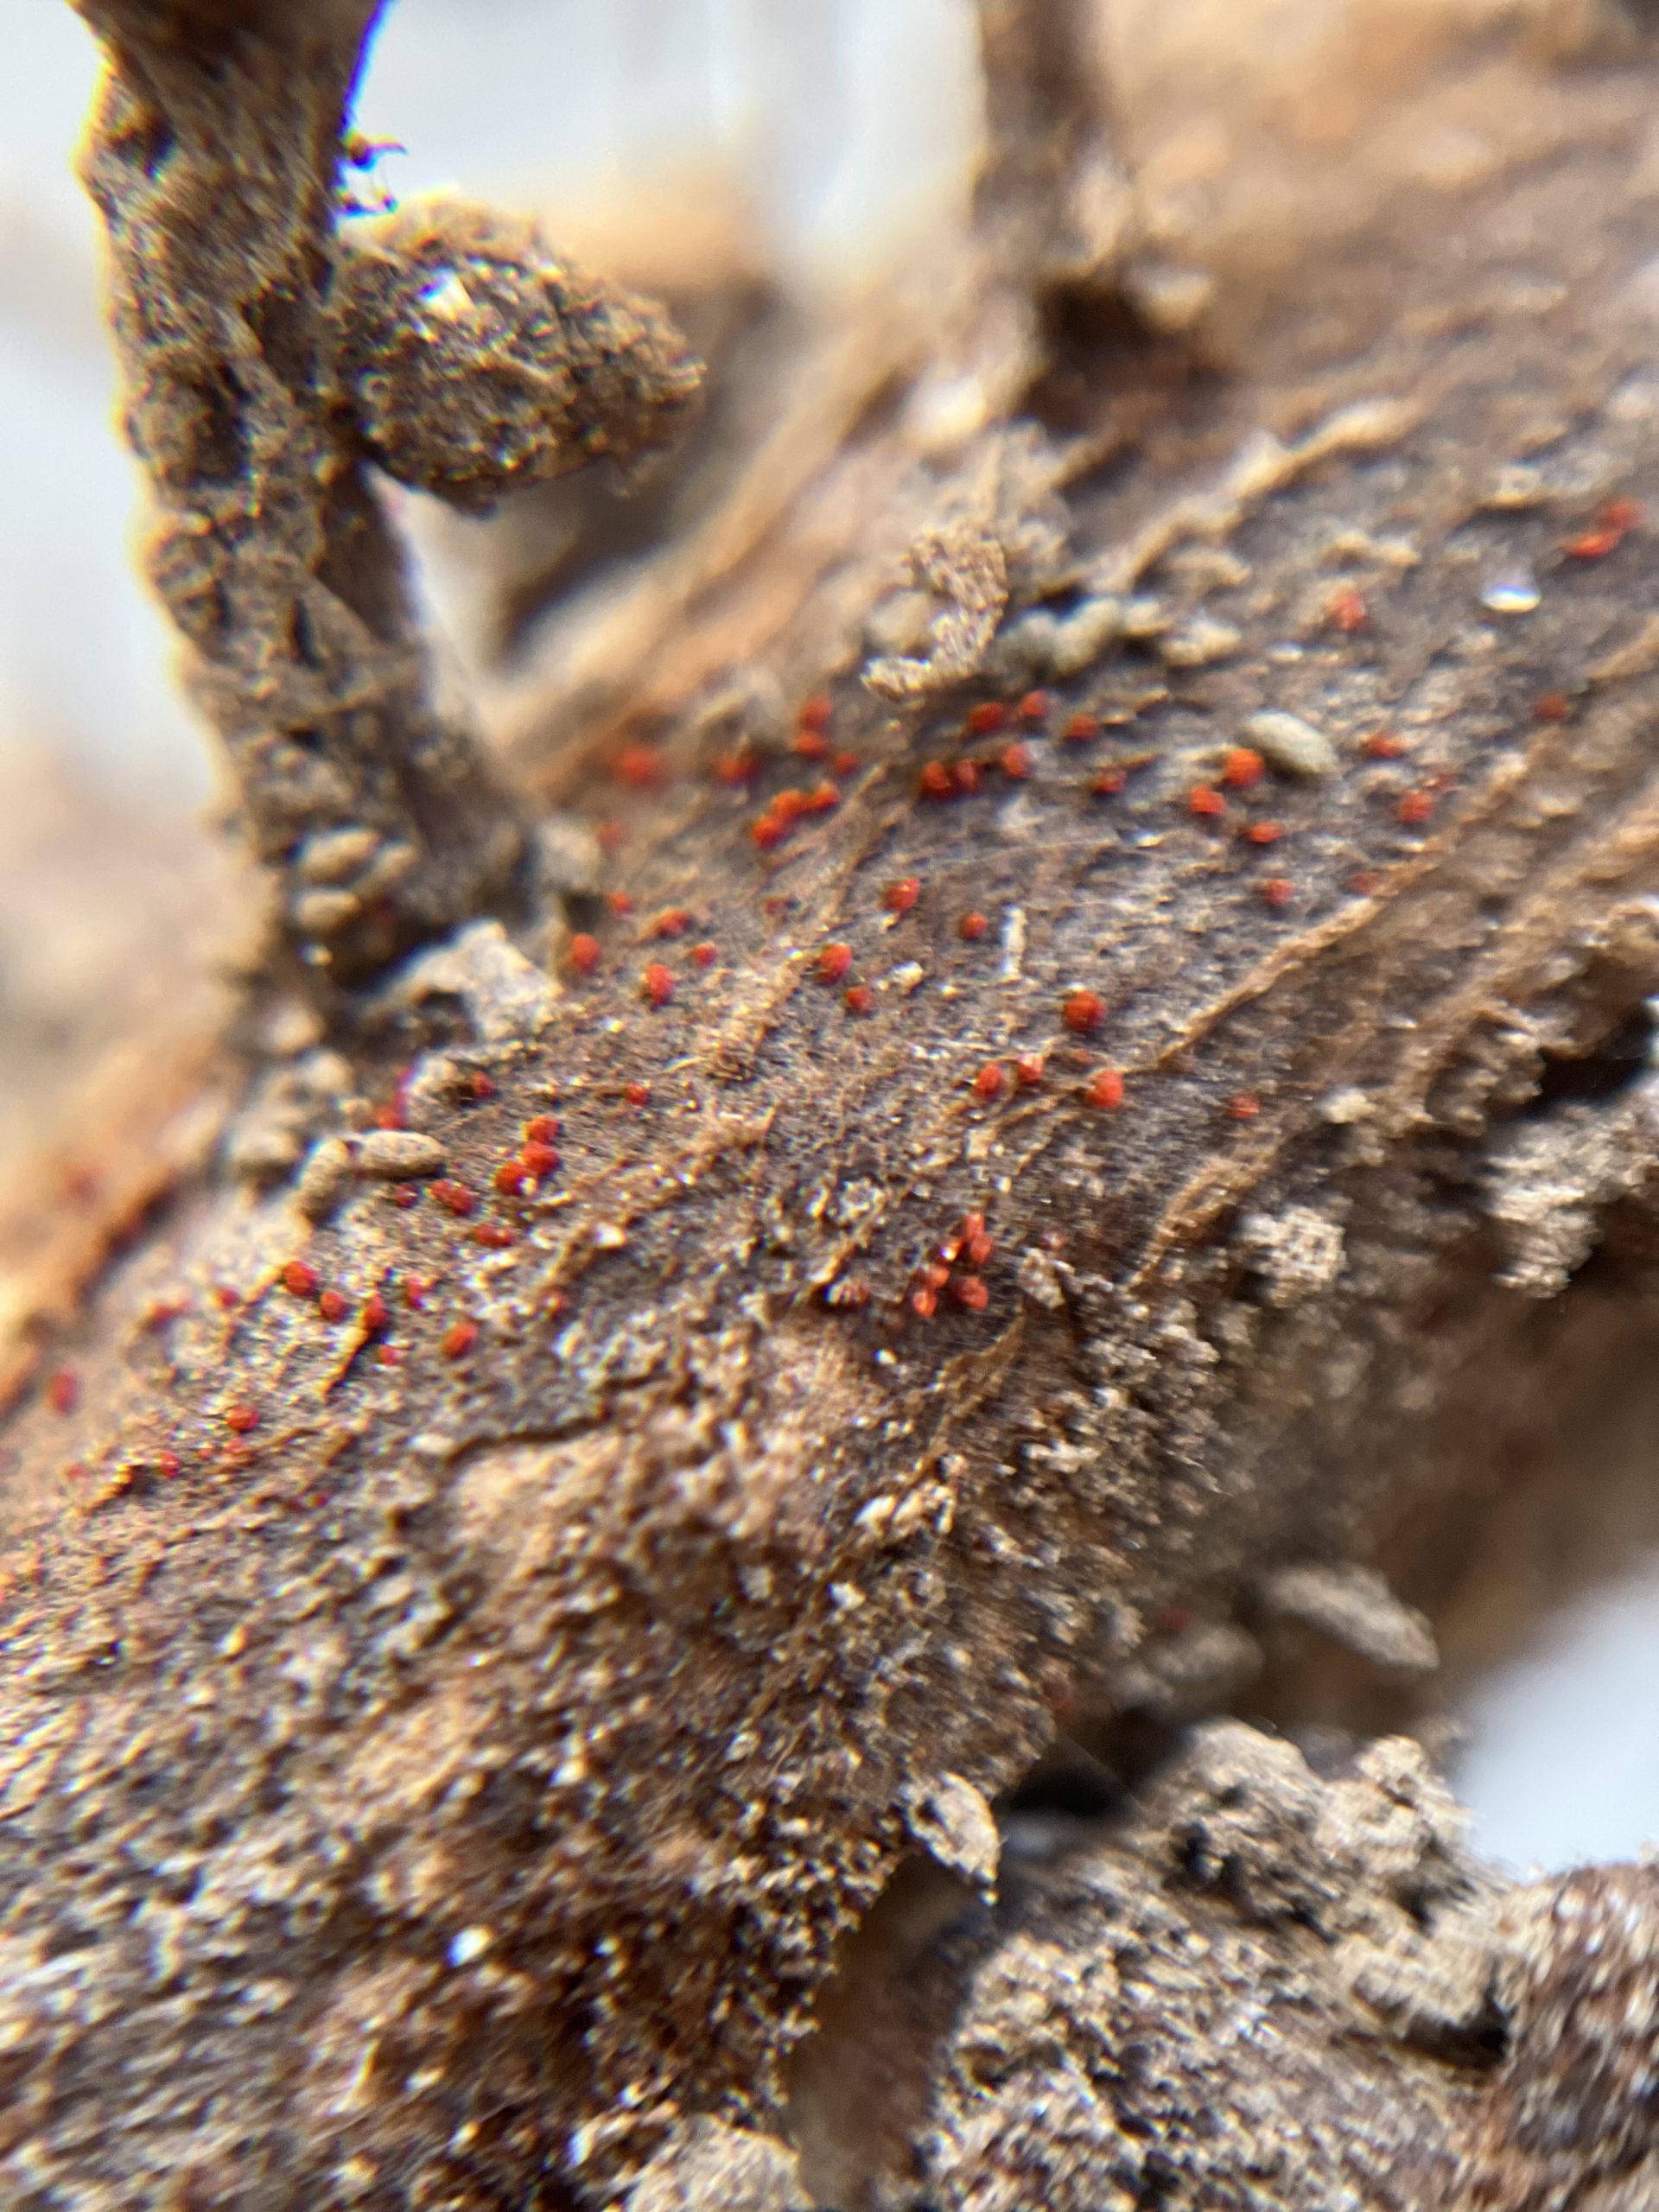 Tiny bright red pustules caused by red crown rot on soybean roots